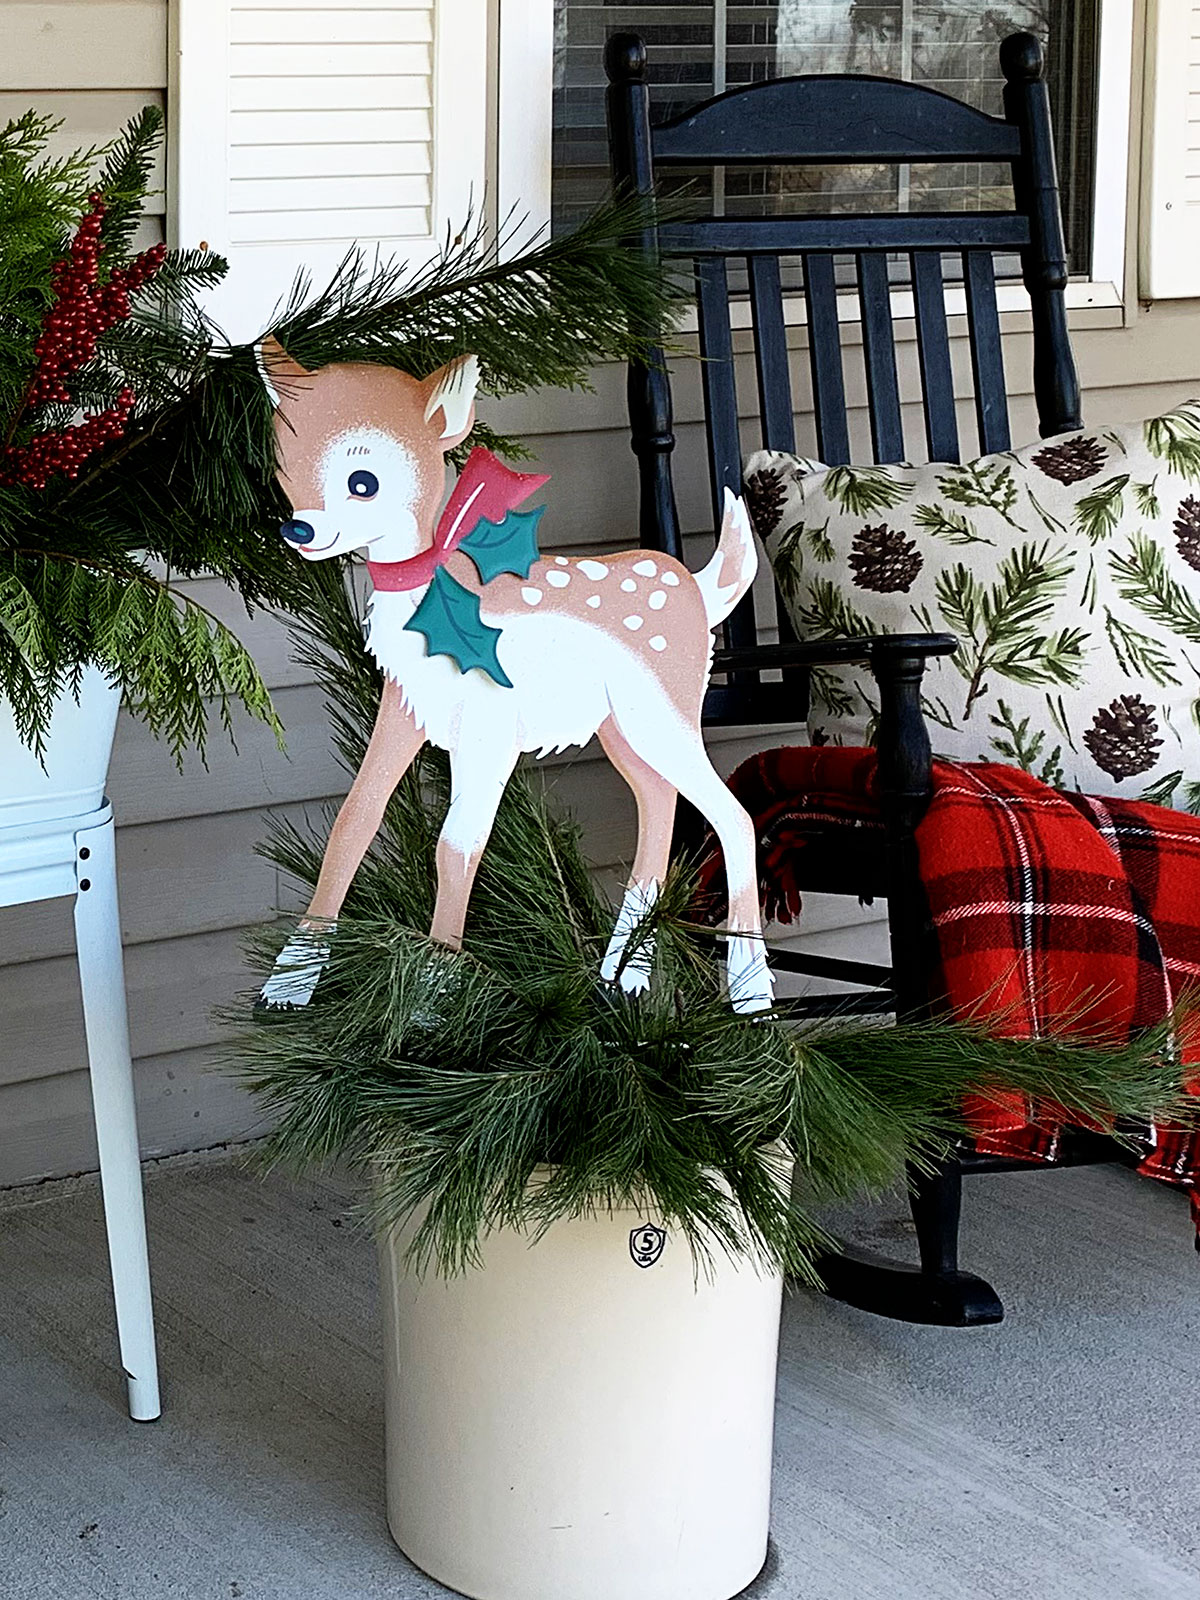 Retro looking reindeer used as Christmas porch decorations.